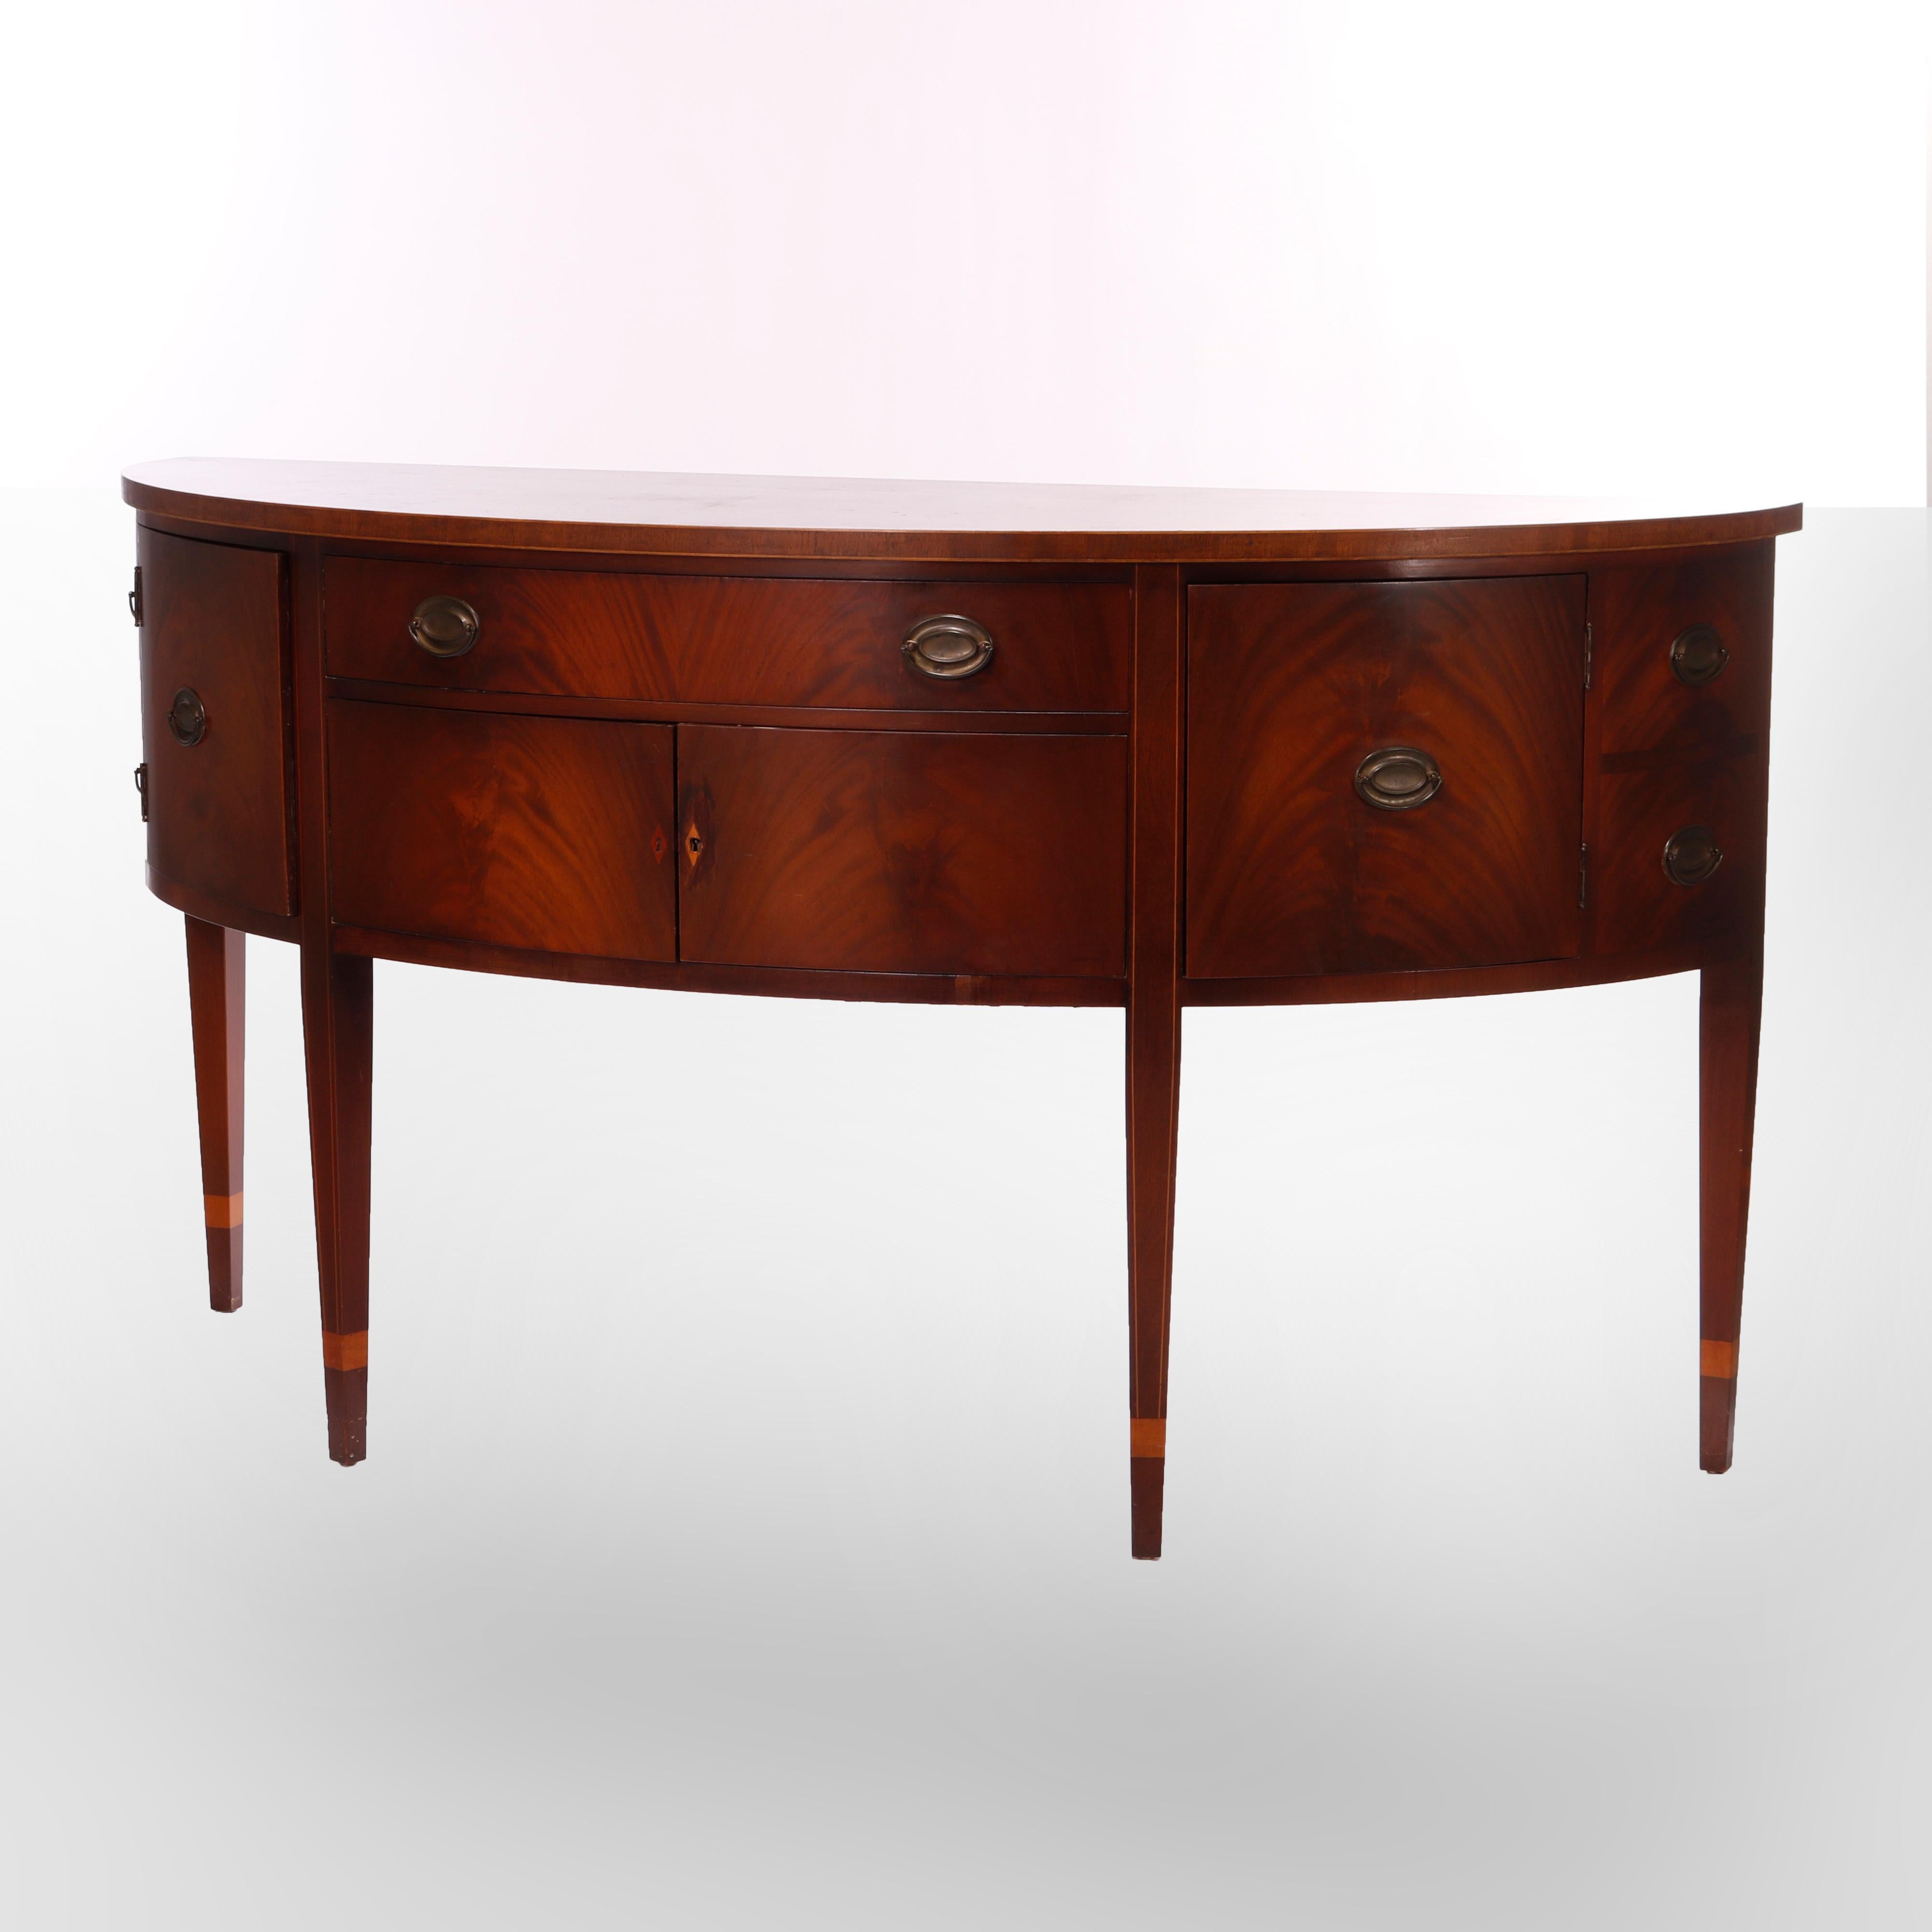 Antique Hepplewhite Style Kittinger Flame Mahogany Demilune Sideboard c1930 In Good Condition For Sale In Big Flats, NY